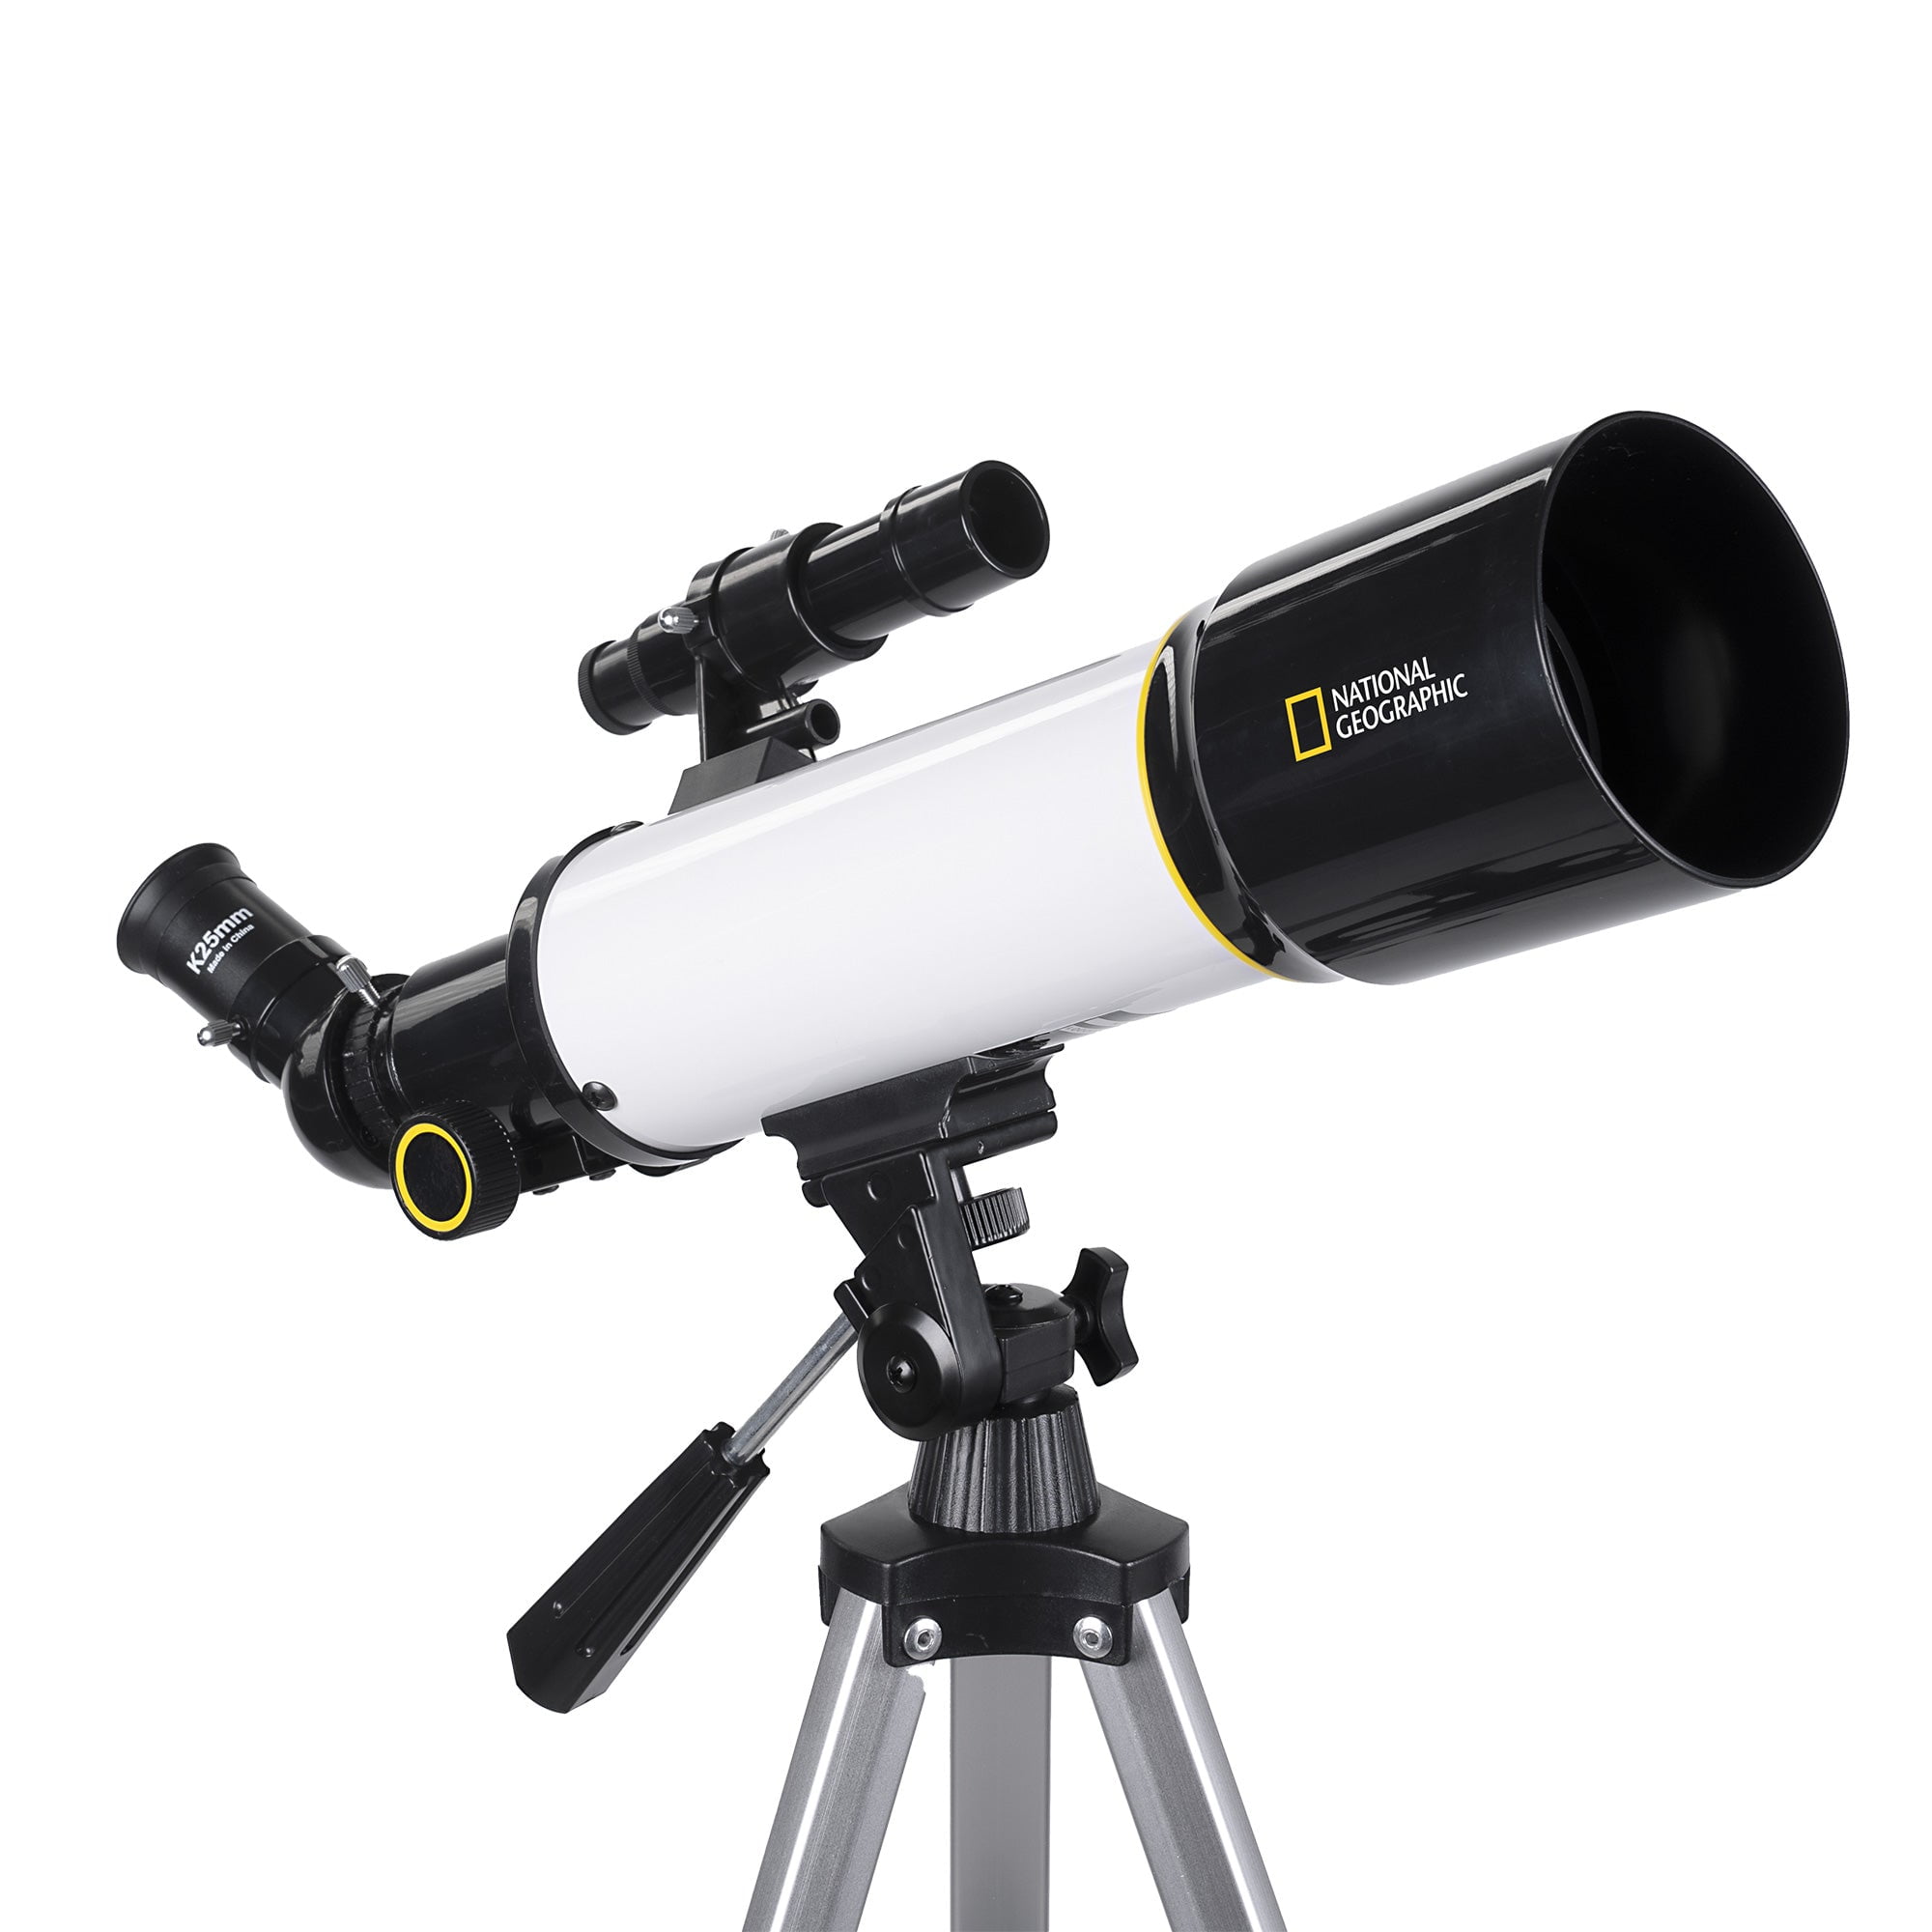 National Geographic SKY VIEW 70 - 70mm Refractor Telescope with Panhandle Mount